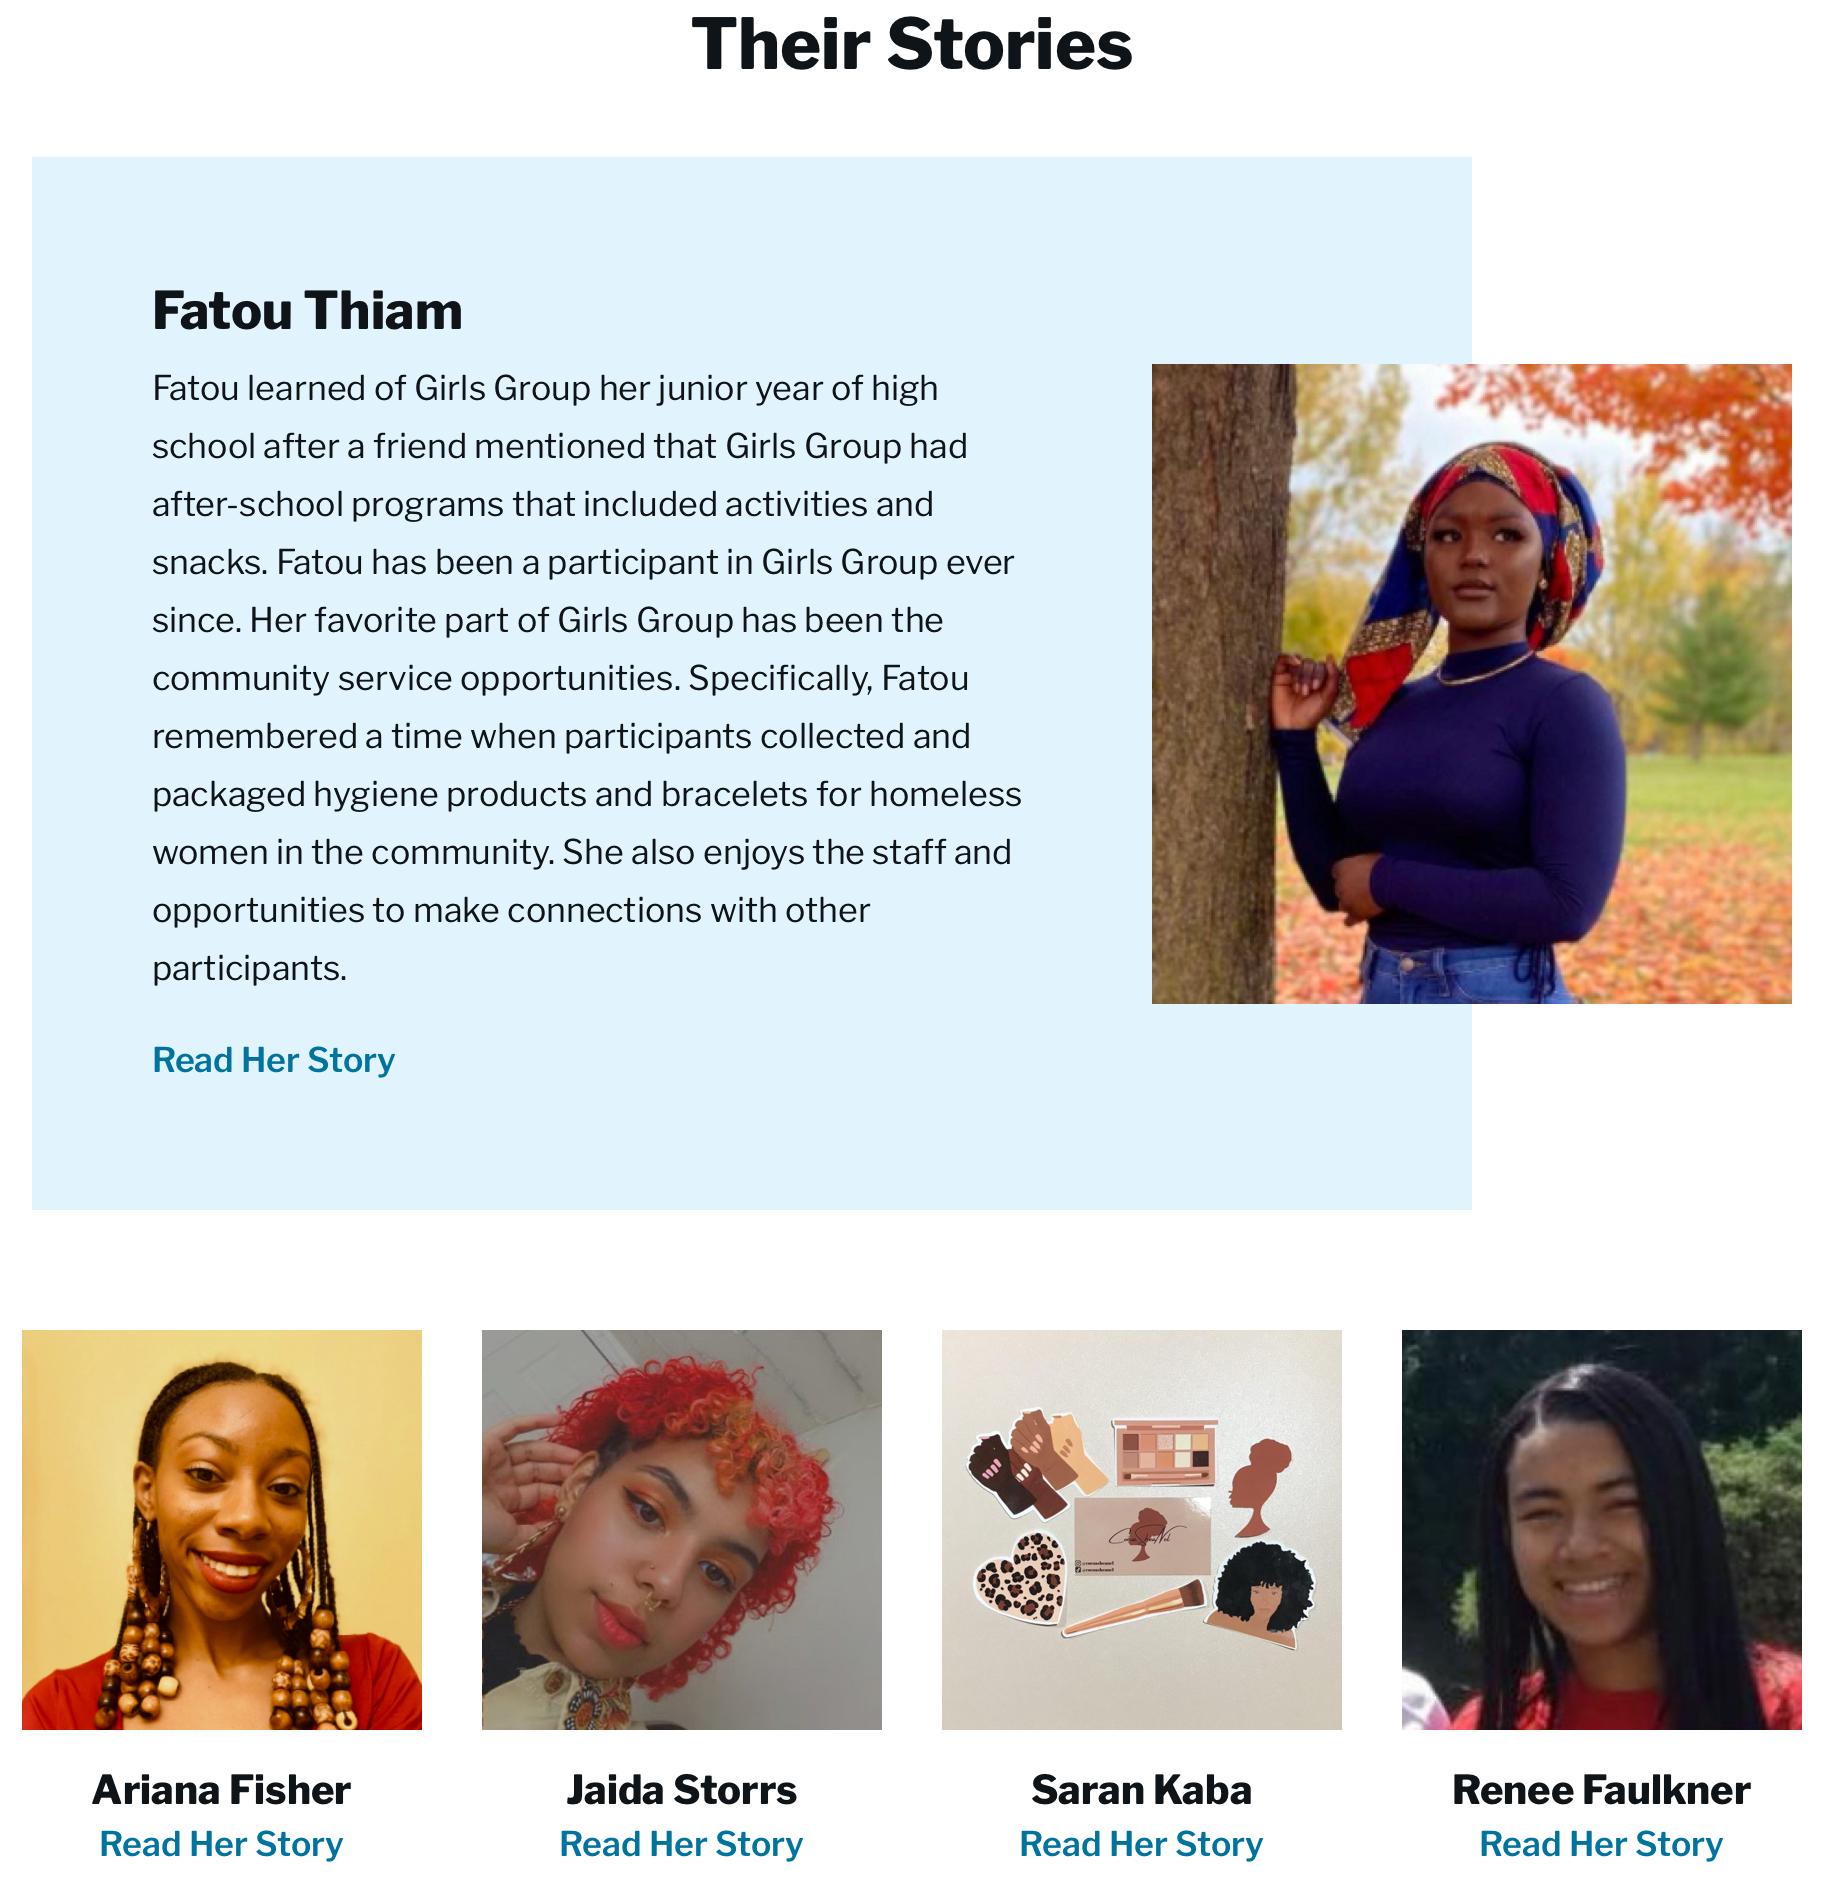 A screen shot of the Girls Group website illustrating the Story feature. One large image and text appear at the top, with four more images and brief text arrayed below.